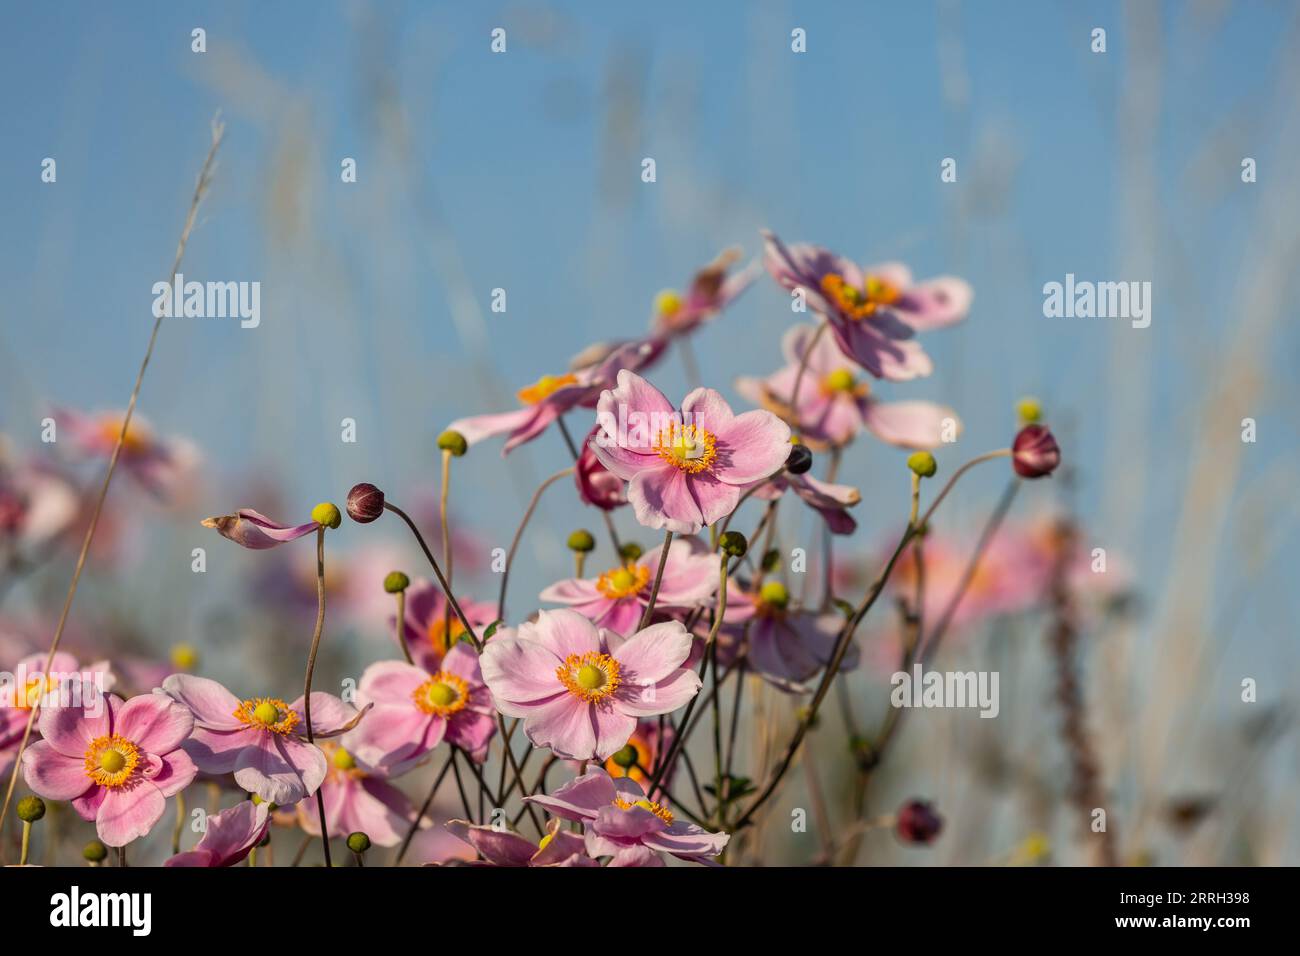 Pretty pink Japanese anemone flowers on a sunny evening, with a shallow depth of field Stock Photo